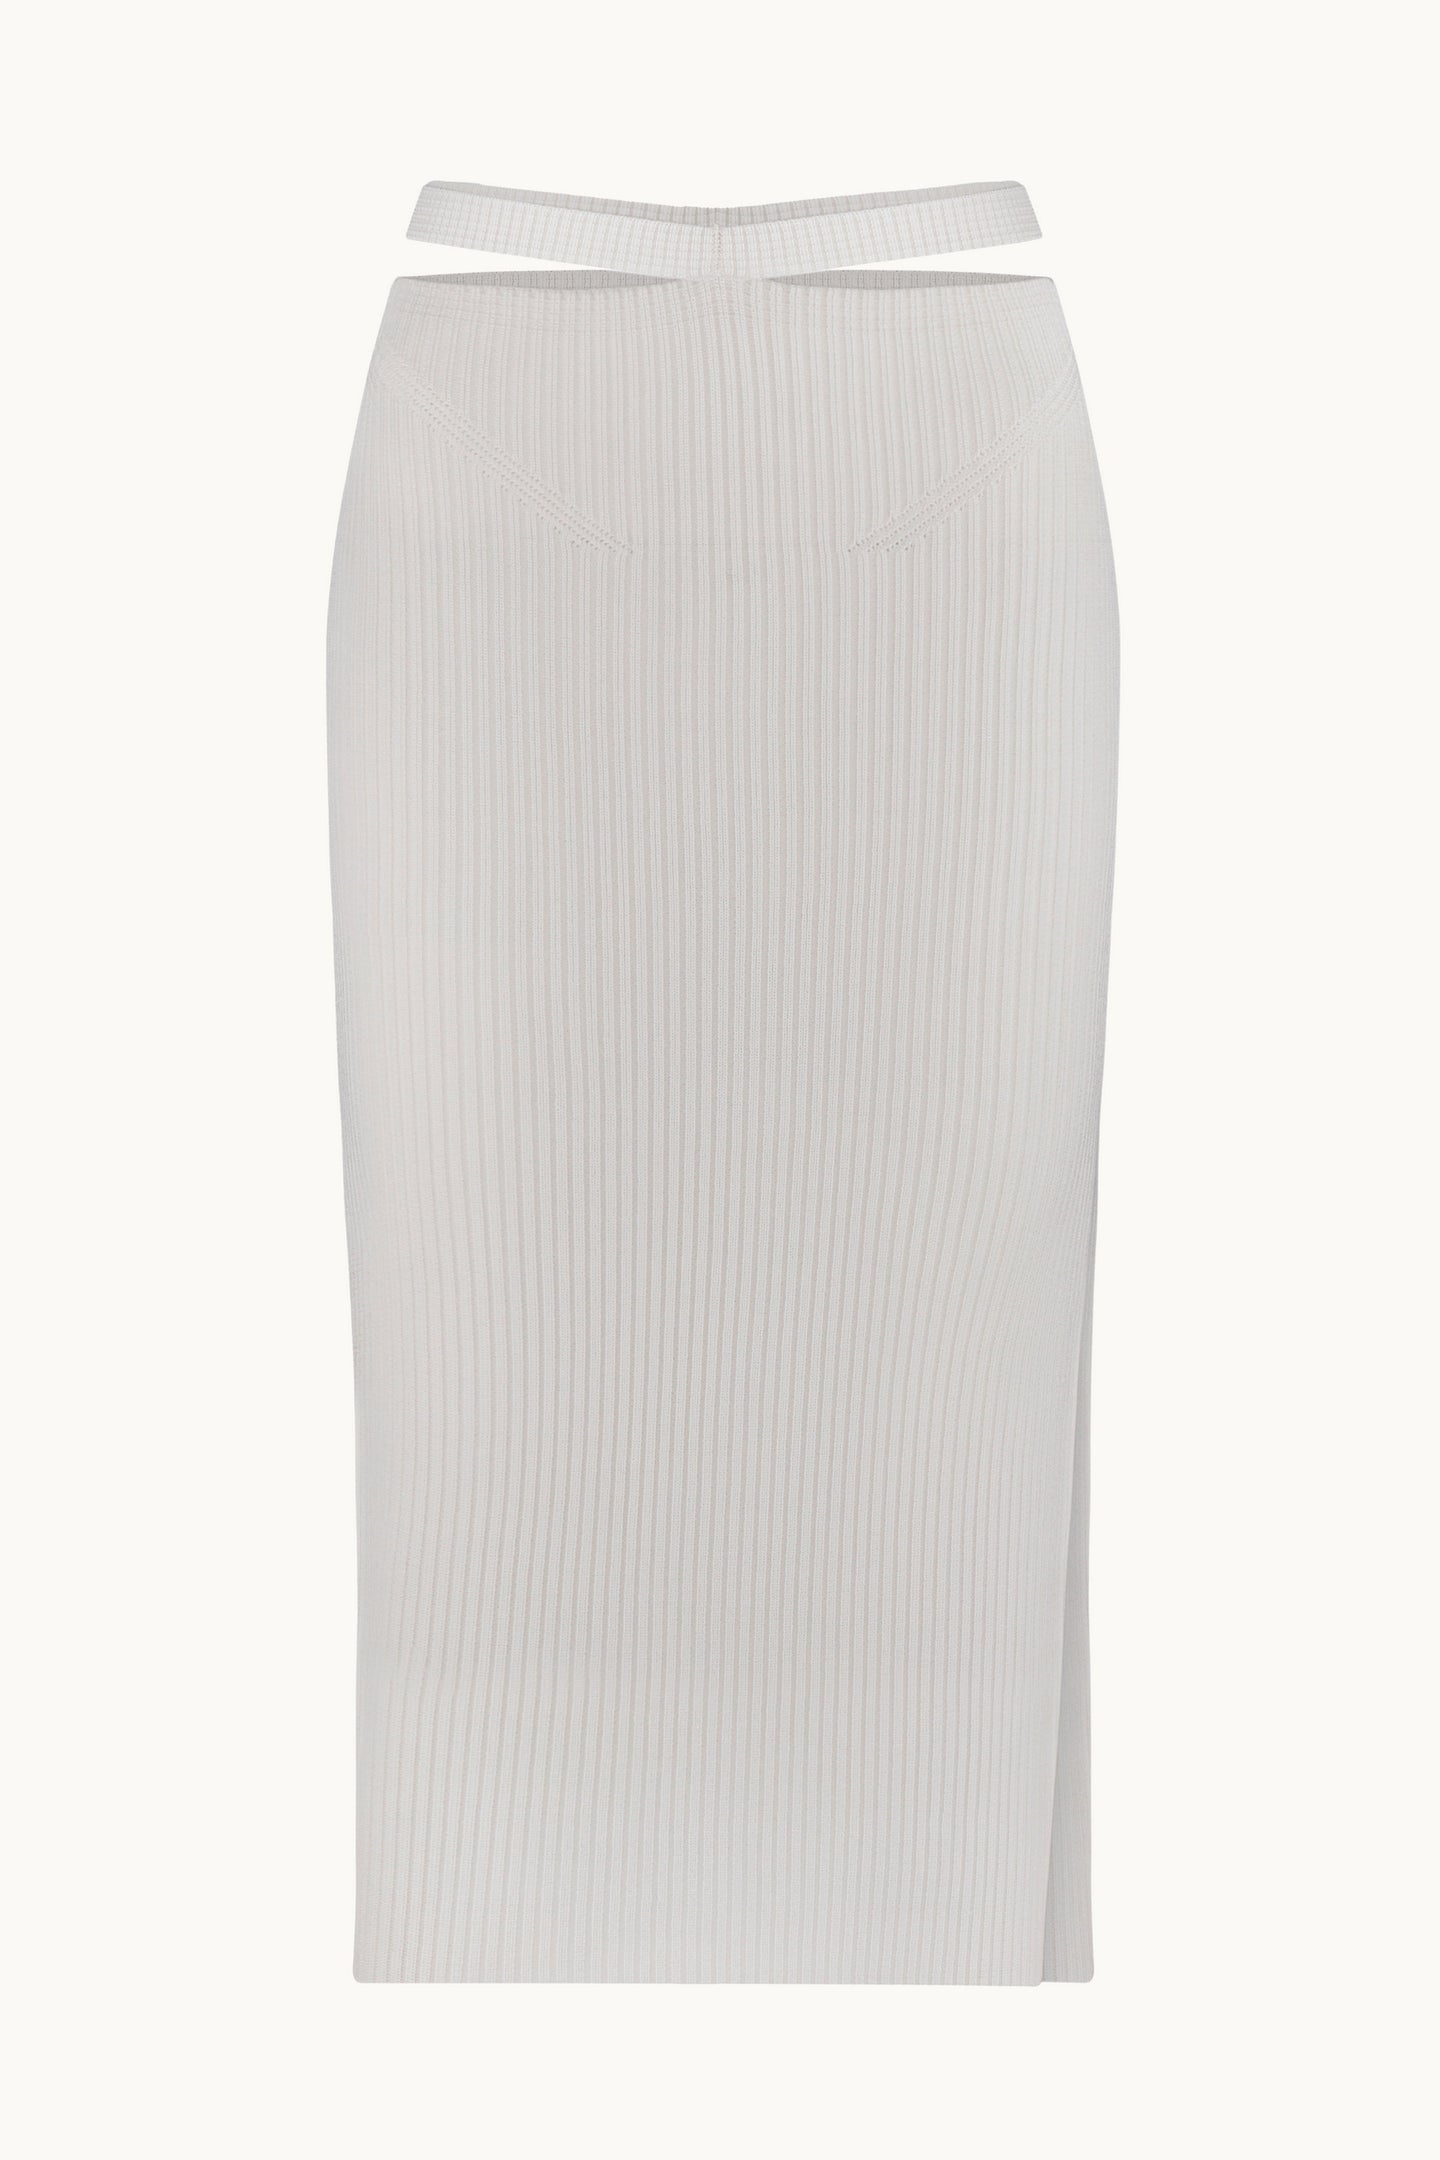 Alizee white skirt front view